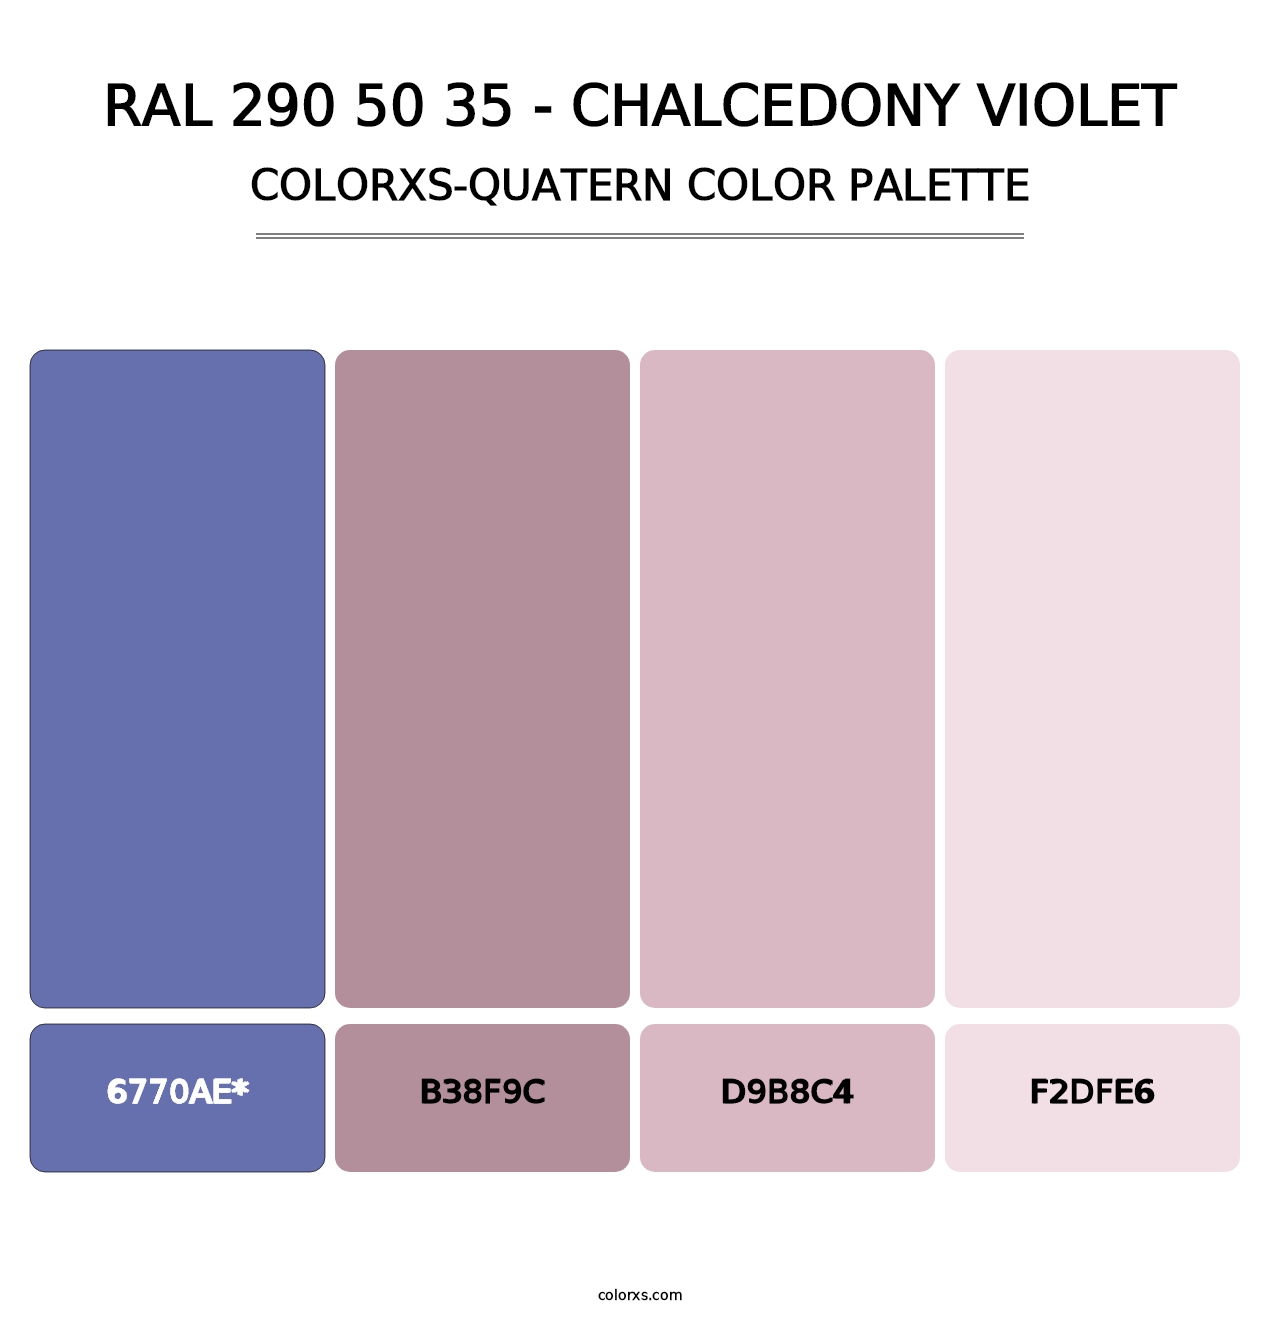 RAL 290 50 35 - Chalcedony Violet - Colorxs Quatern Palette